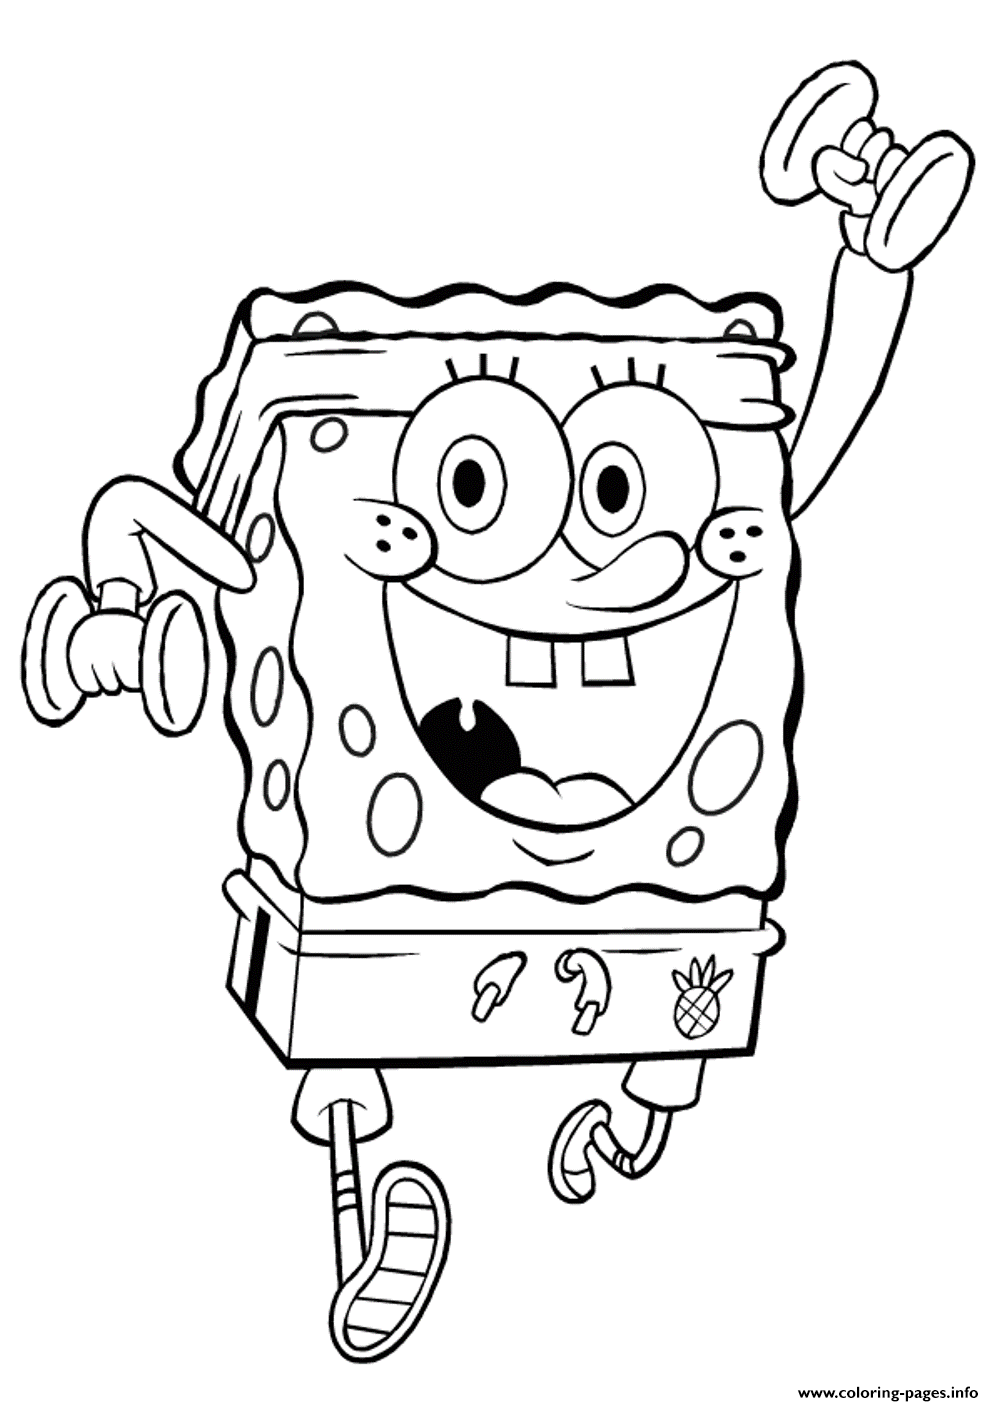 Coloring Pages Spongebob Work Outf537 Coloring Pages Printable